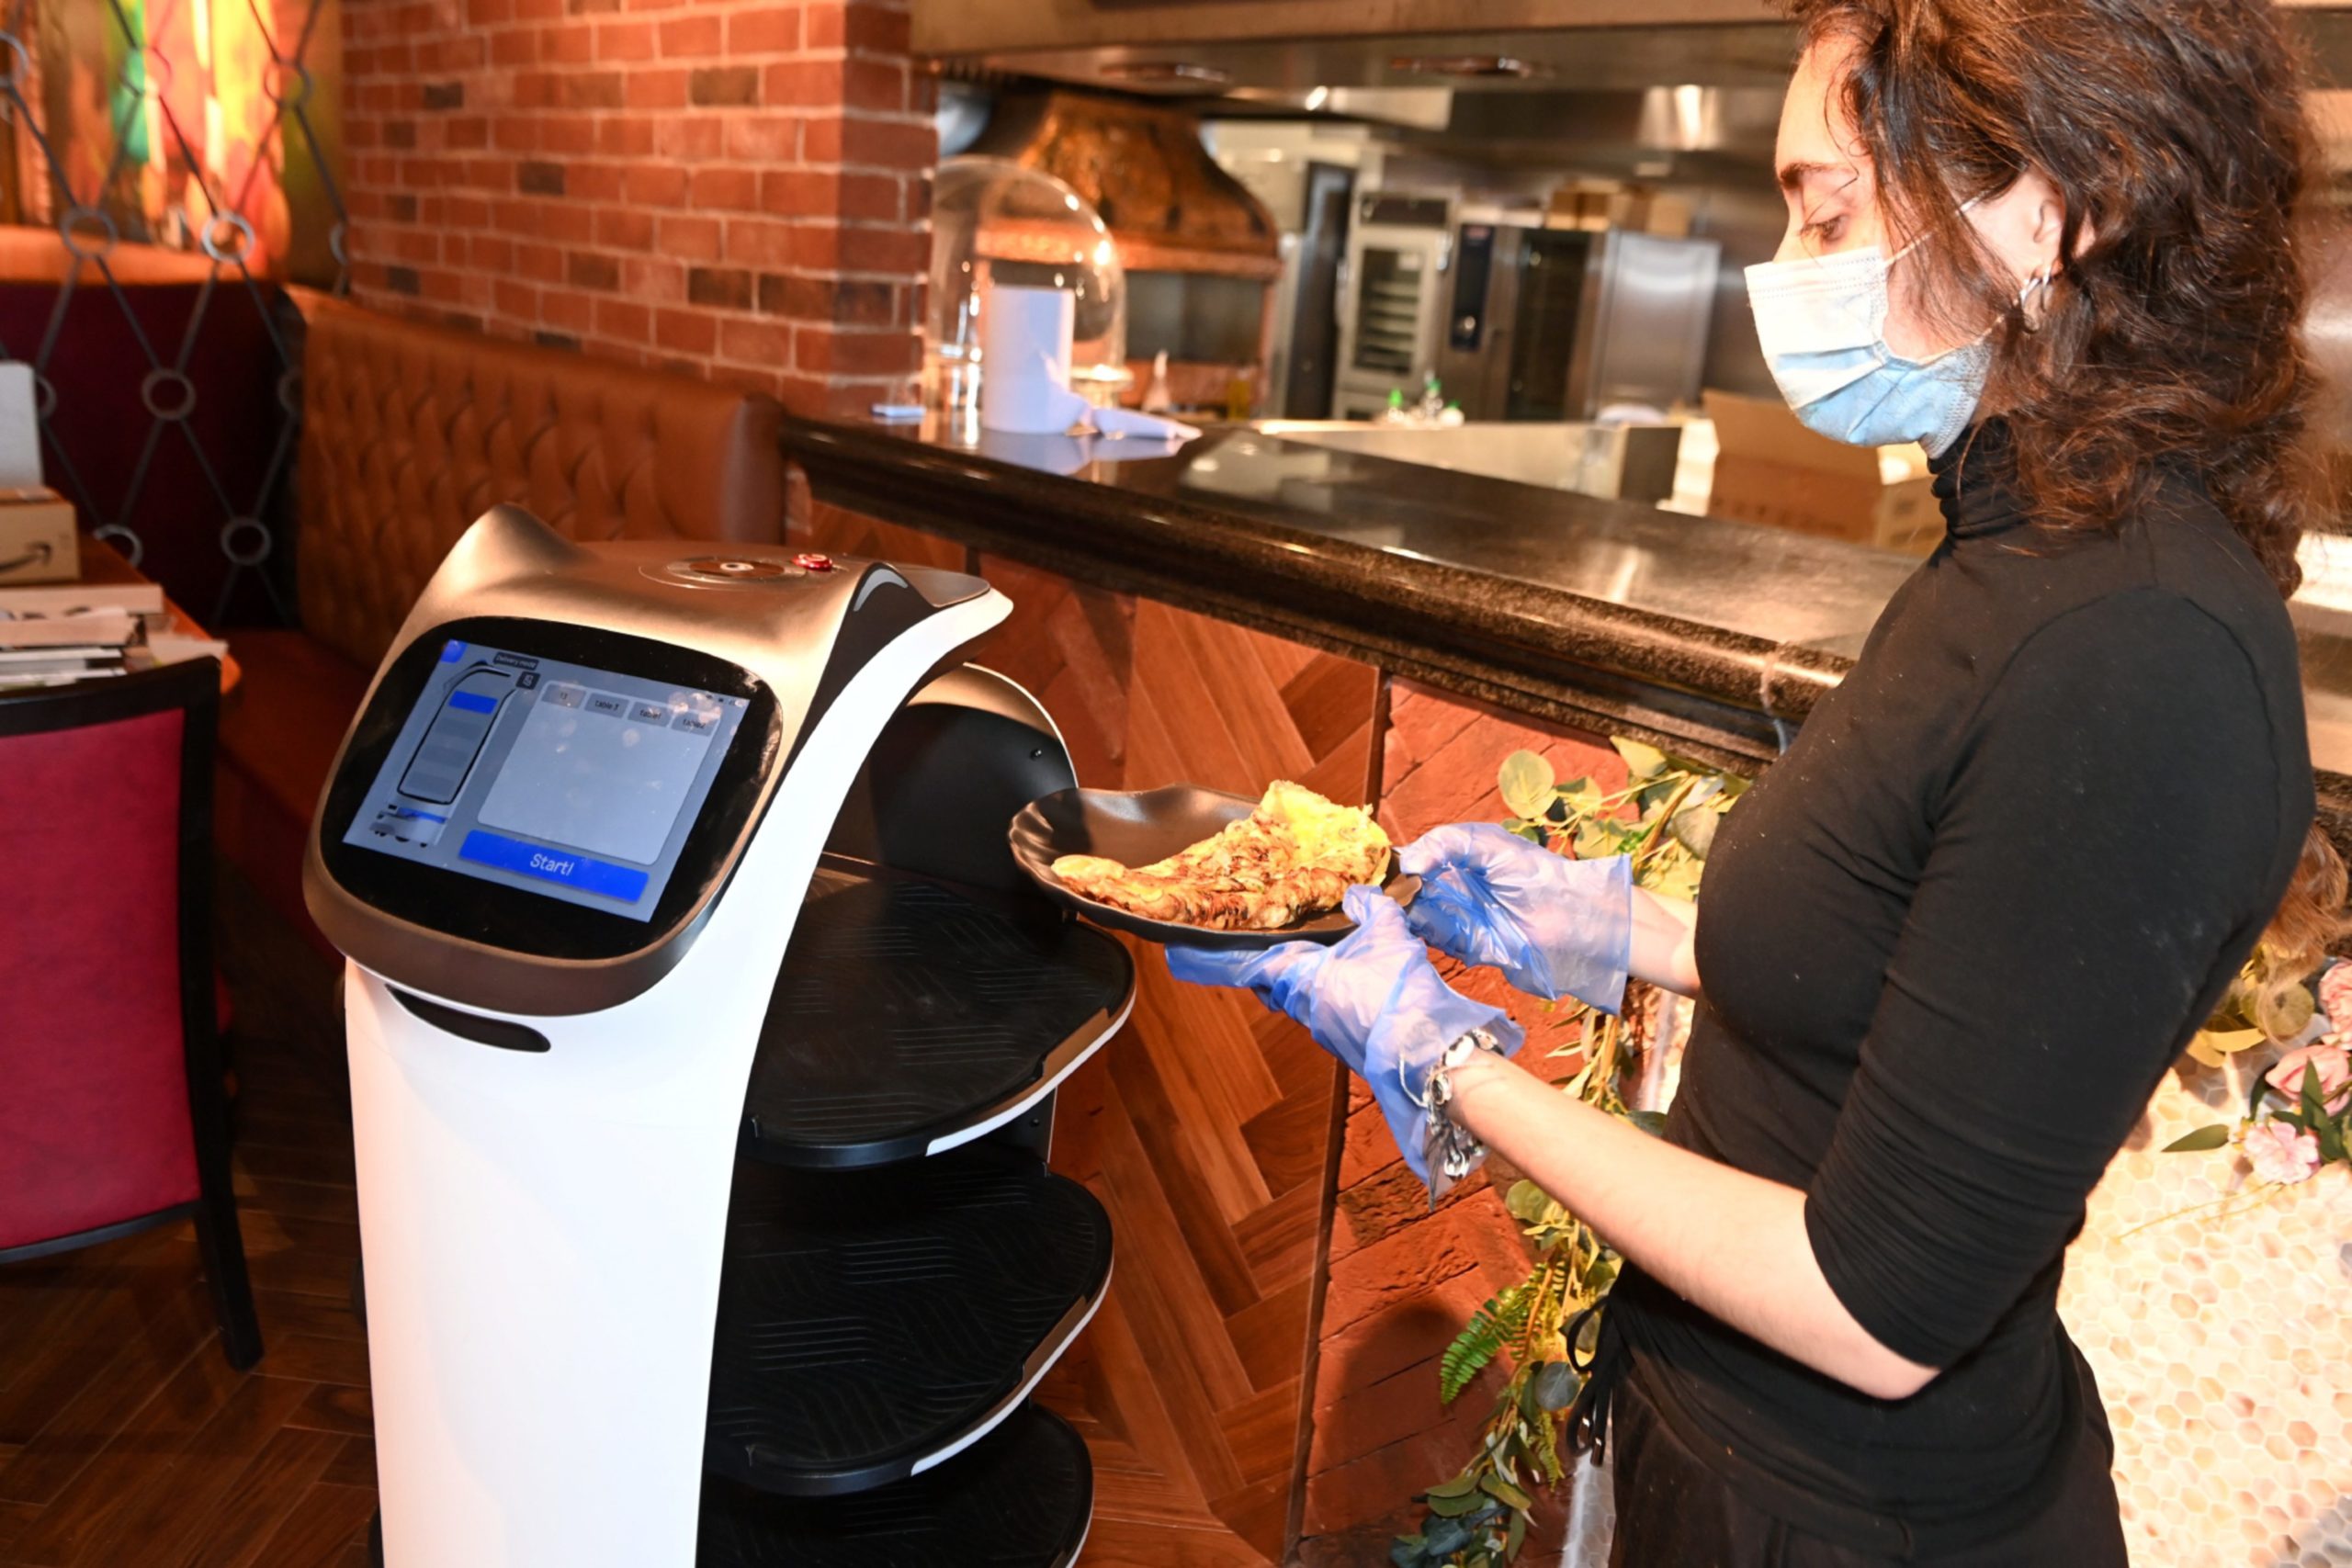 A member of staff places the food onto the robot which will take it to the customer's table.